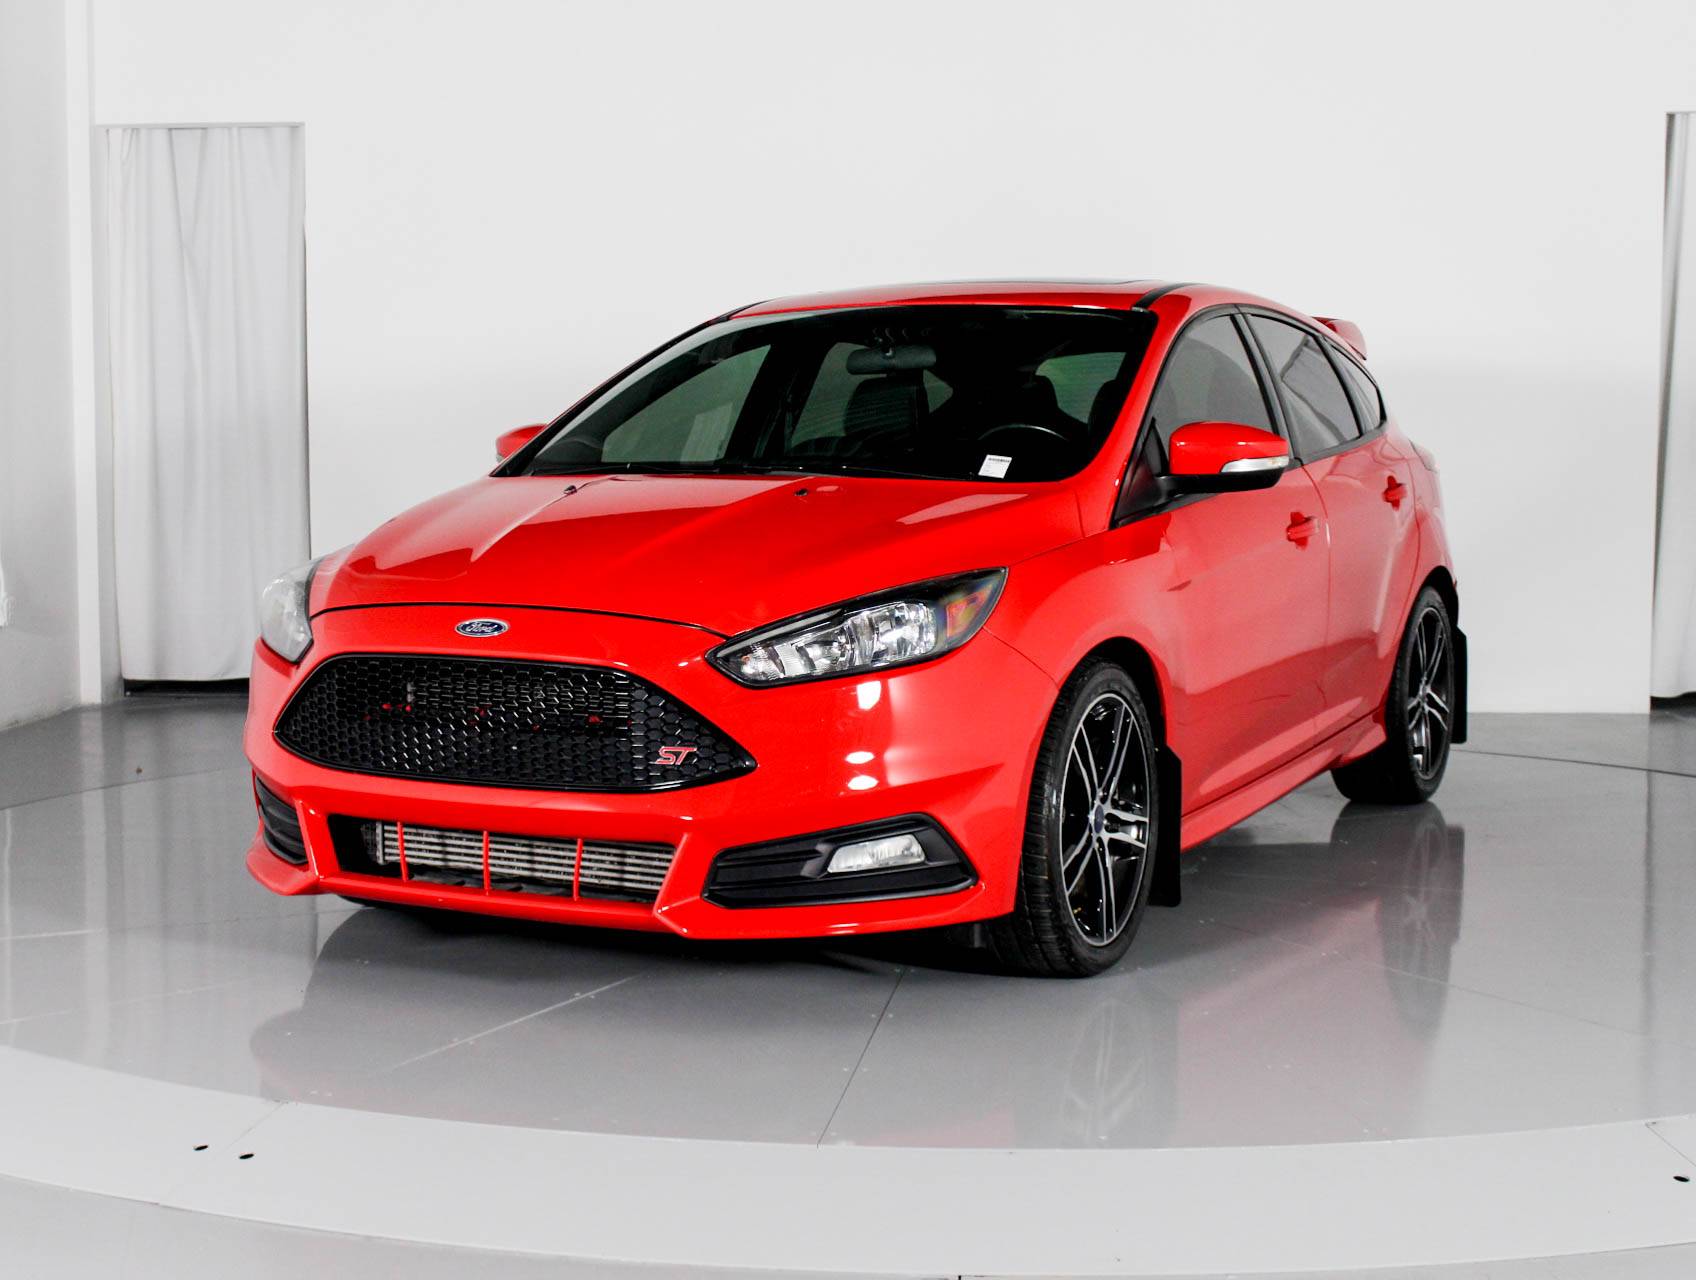 Used 2016 FORD FOCUS ST for sale in MARGATE